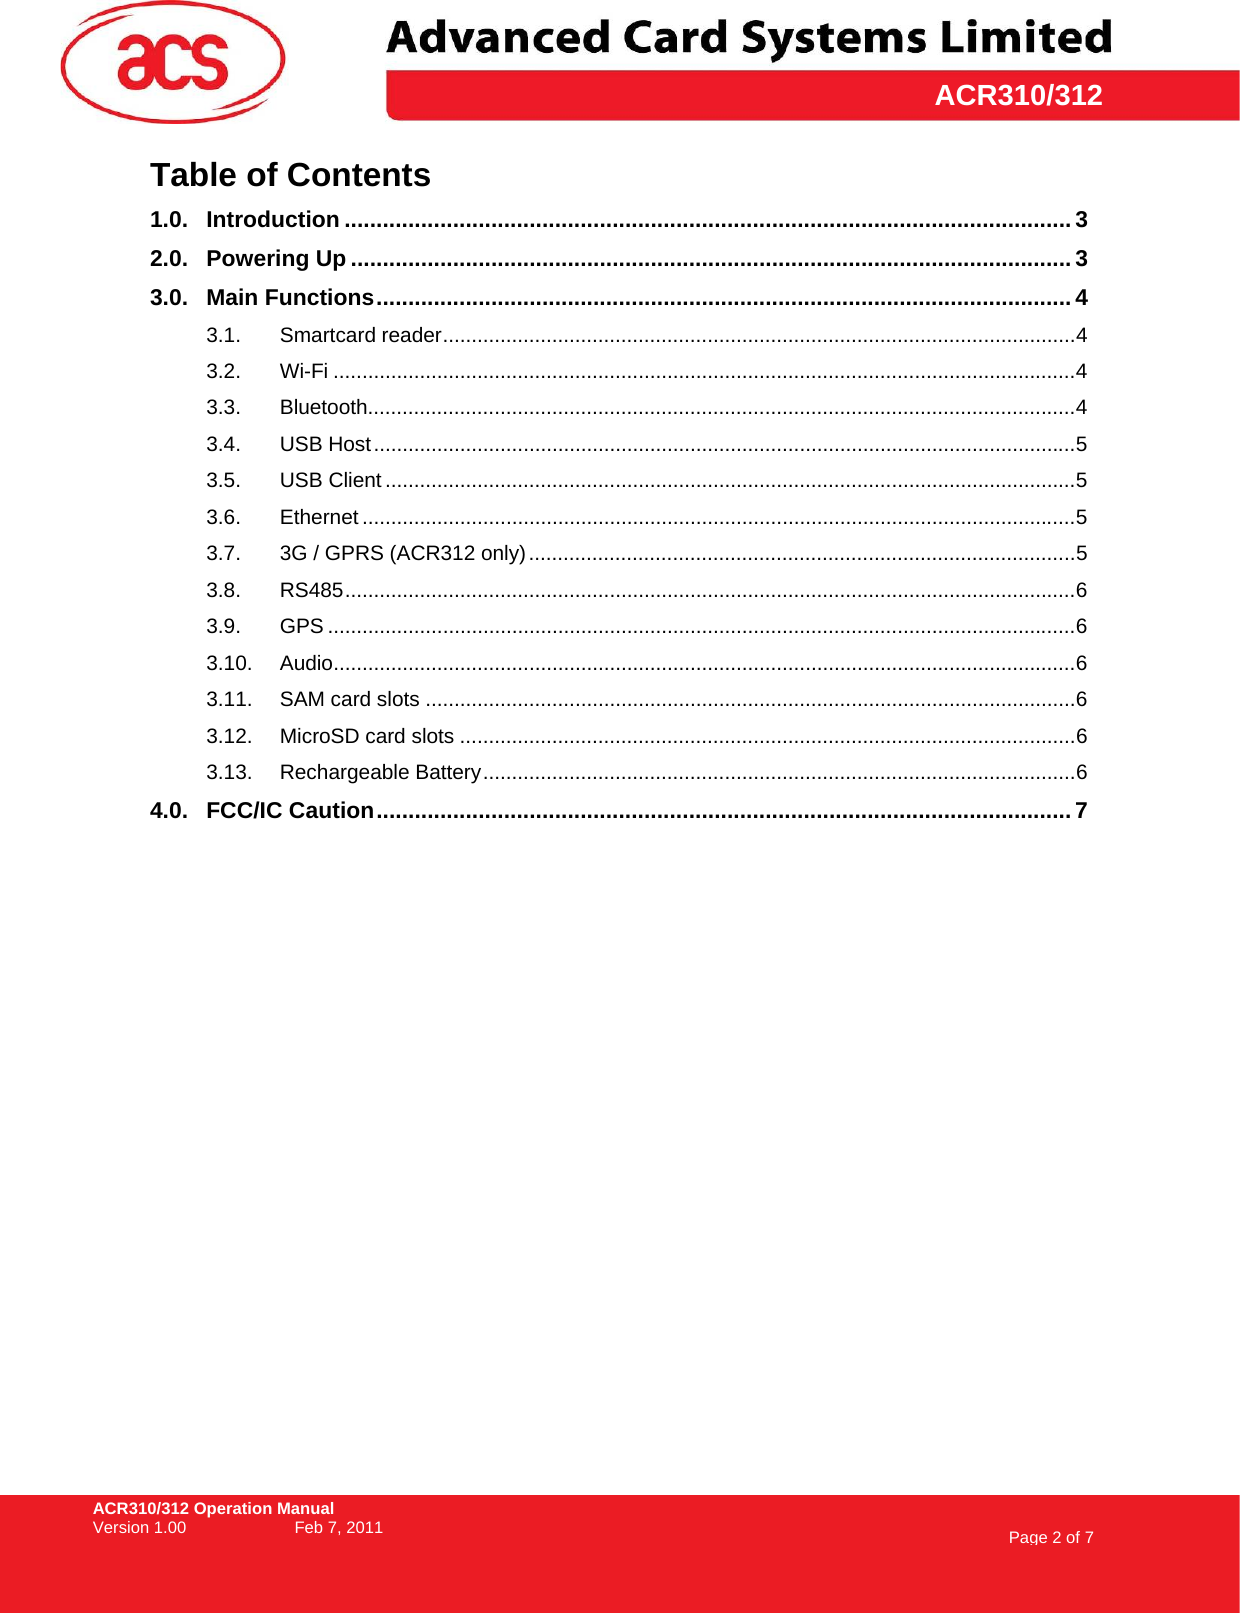 ACR310/312 Operation Manual Version 1.00    Feb 7, 2011  Page 2 of 7     ACR310/312Table of Contents 1.0. Introduction .................................................................................................................. 3 2.0. Powering Up ................................................................................................................. 3 3.0. Main Functions............................................................................................................. 4 3.1. Smartcard reader..............................................................................................................4 3.2. Wi-Fi .................................................................................................................................4 3.3. Bluetooth...........................................................................................................................4 3.4. USB Host..........................................................................................................................5 3.5. USB Client ........................................................................................................................5 3.6. Ethernet ............................................................................................................................5 3.7. 3G / GPRS (ACR312 only)...............................................................................................5 3.8. RS485...............................................................................................................................6 3.9. GPS ..................................................................................................................................6 3.10. Audio.................................................................................................................................6 3.11. SAM card slots .................................................................................................................6 3.12. MicroSD card slots ...........................................................................................................6 3.13. Rechargeable Battery.......................................................................................................6 4.0. FCC/IC Caution............................................................................................................. 7  